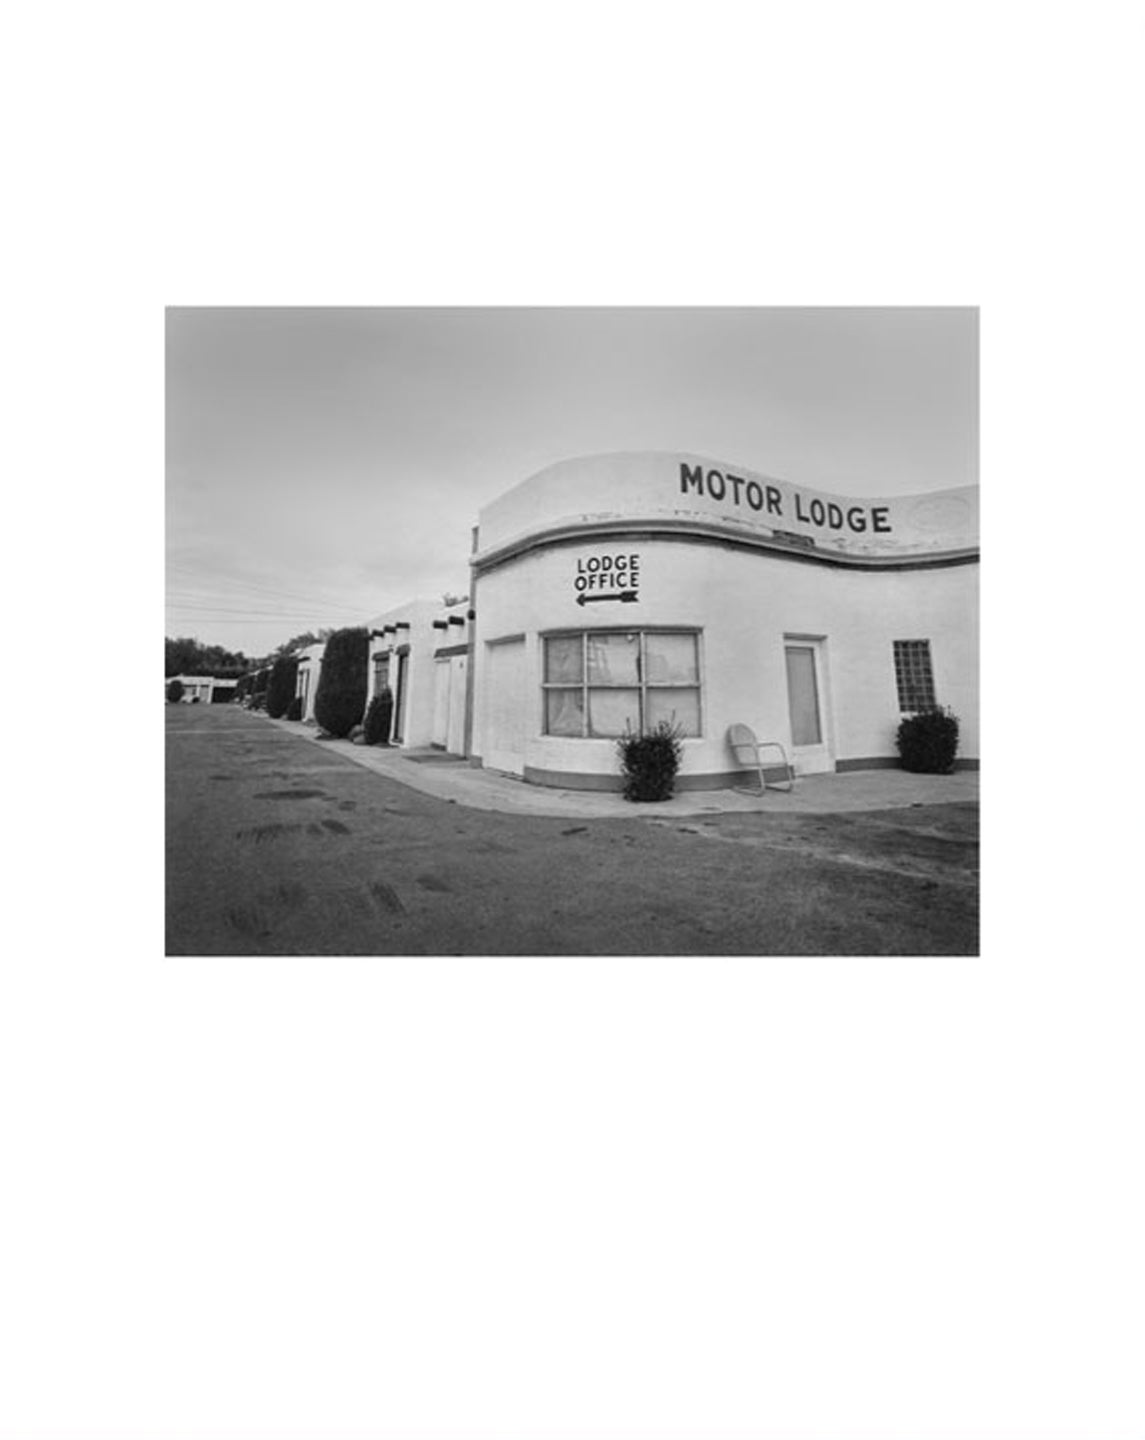 NZ Library #1: John Schott: Route 66, Special Limited Edition (with Gelatin Silver Contact Print "Untitled" from the Series "Route 66 Motels," Intersection and a Fina Service Station) (NZ Library - Set One, Volume Six)